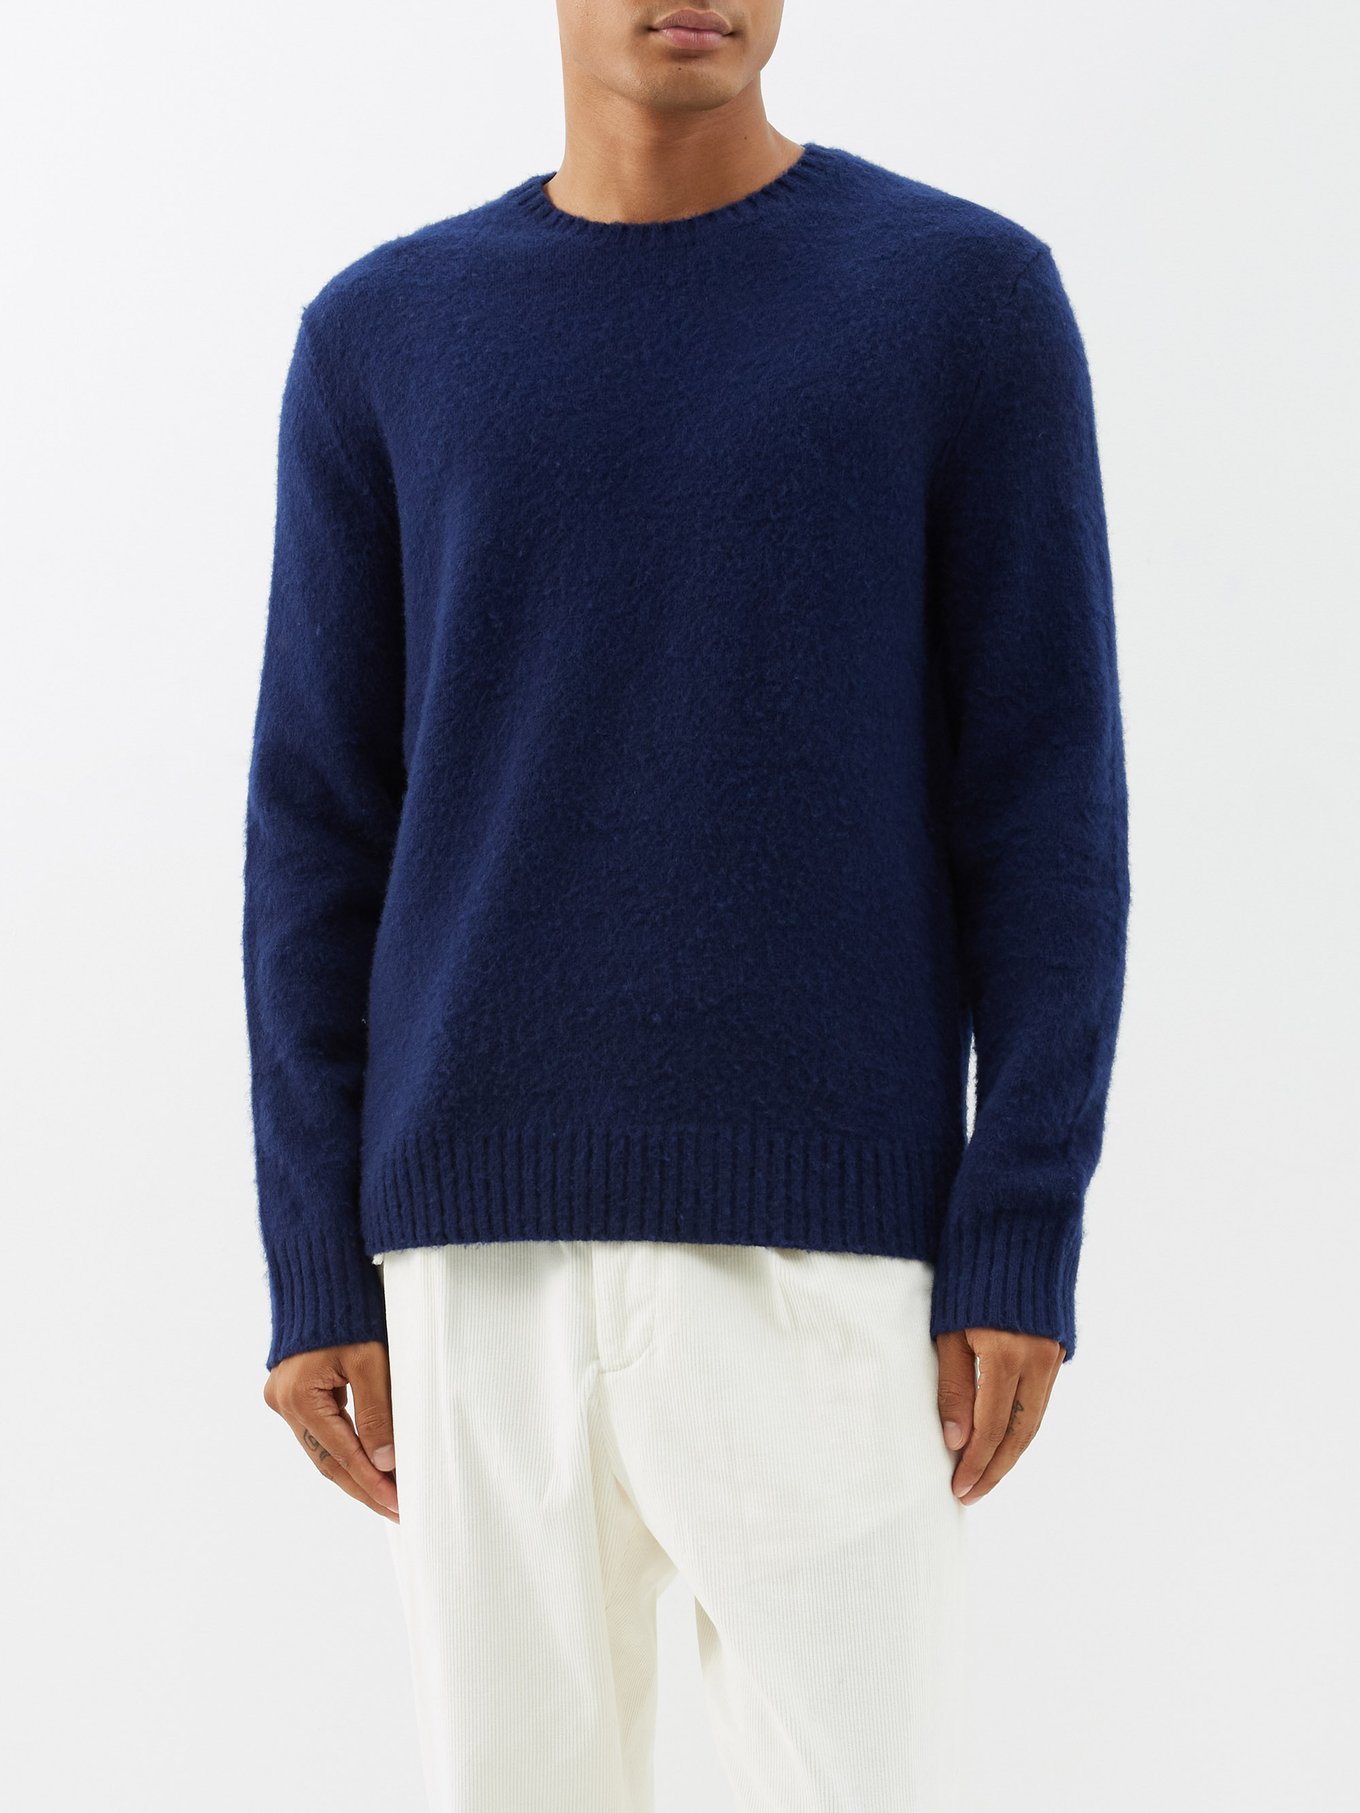 Merino Baseball Sweater - Deep Blue with Suede Elbow Patches | Untuckit